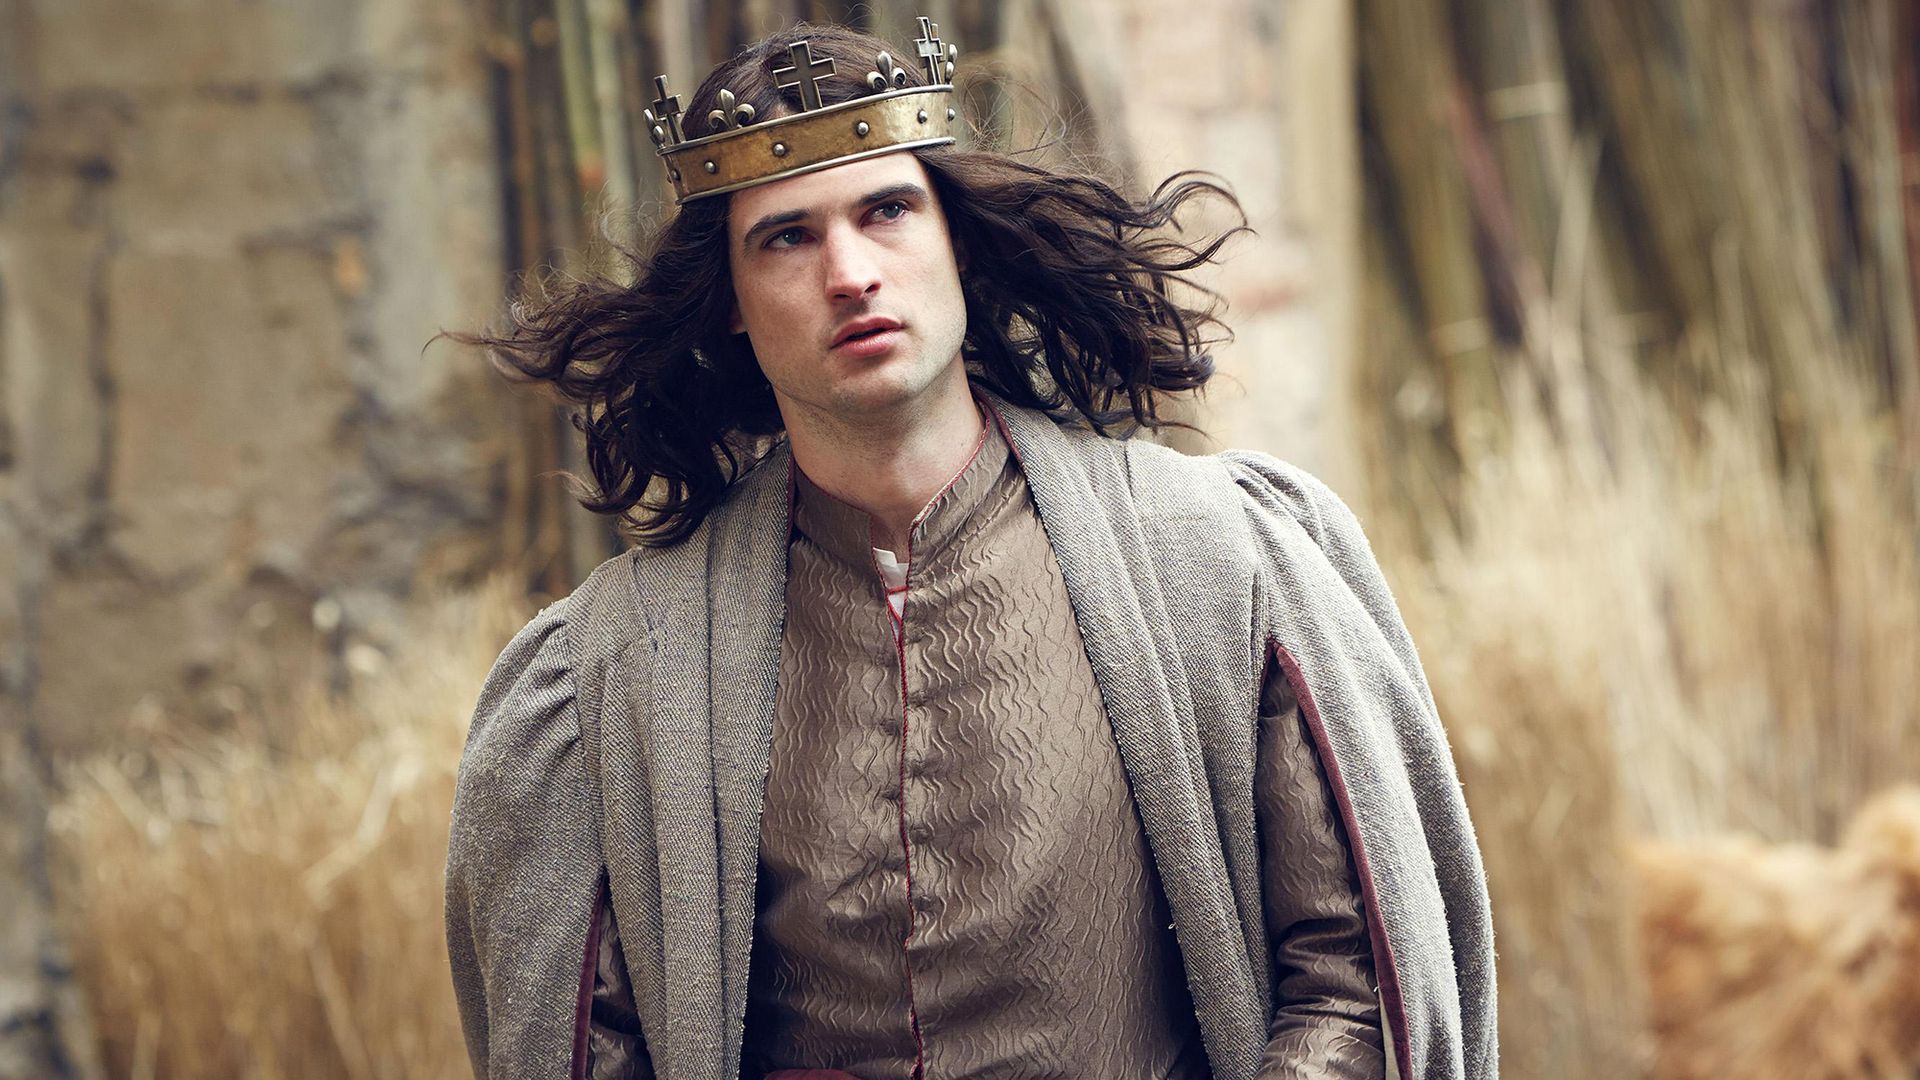 Tom Sturridge in the series 'The Hollow Crown'